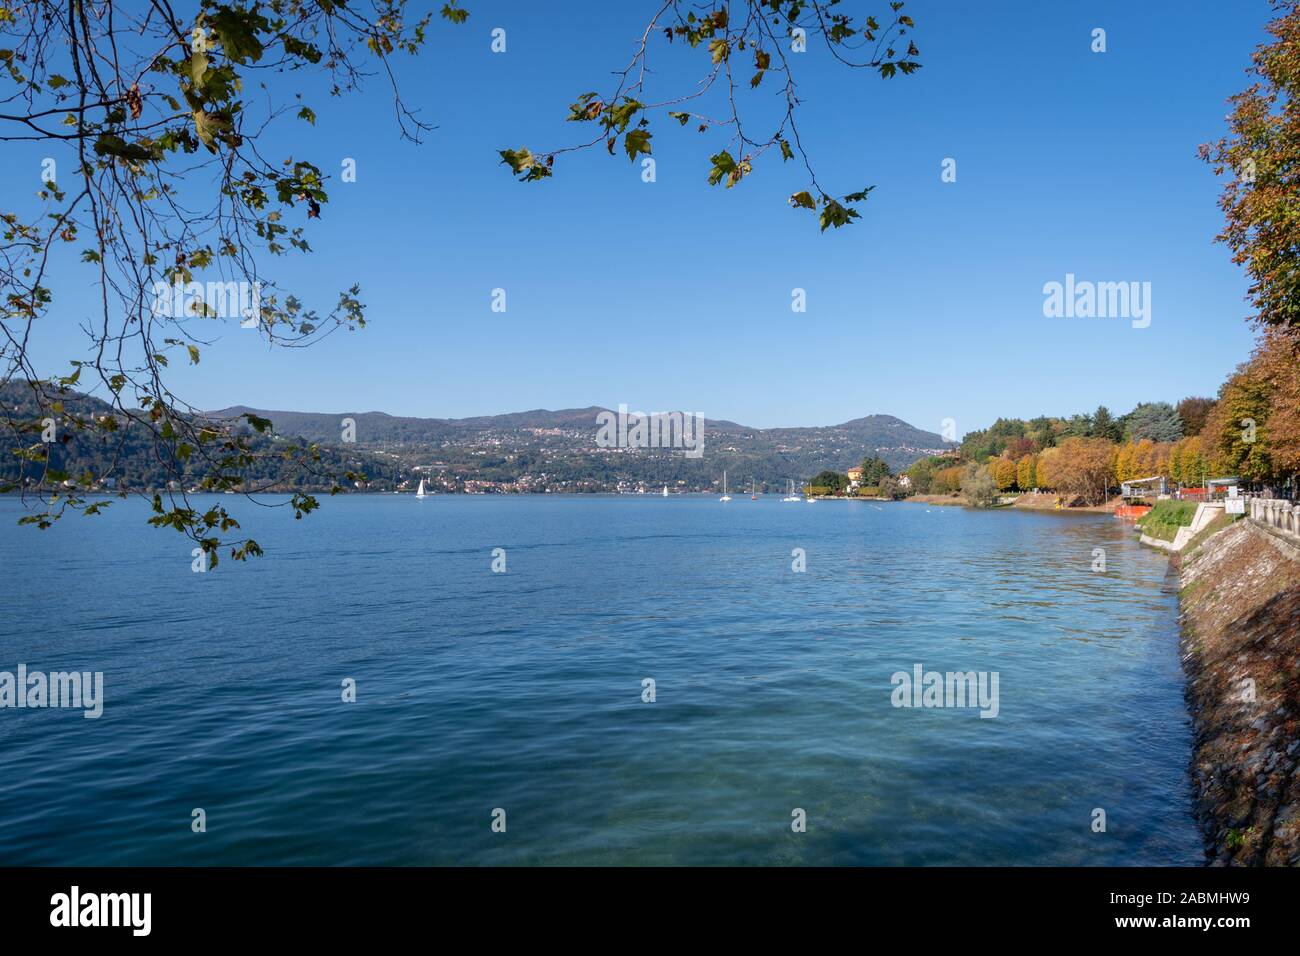 Lake Maggiore seen from Ispra, Province of Varese, Lombardy region, Northern Italy Stock Photo